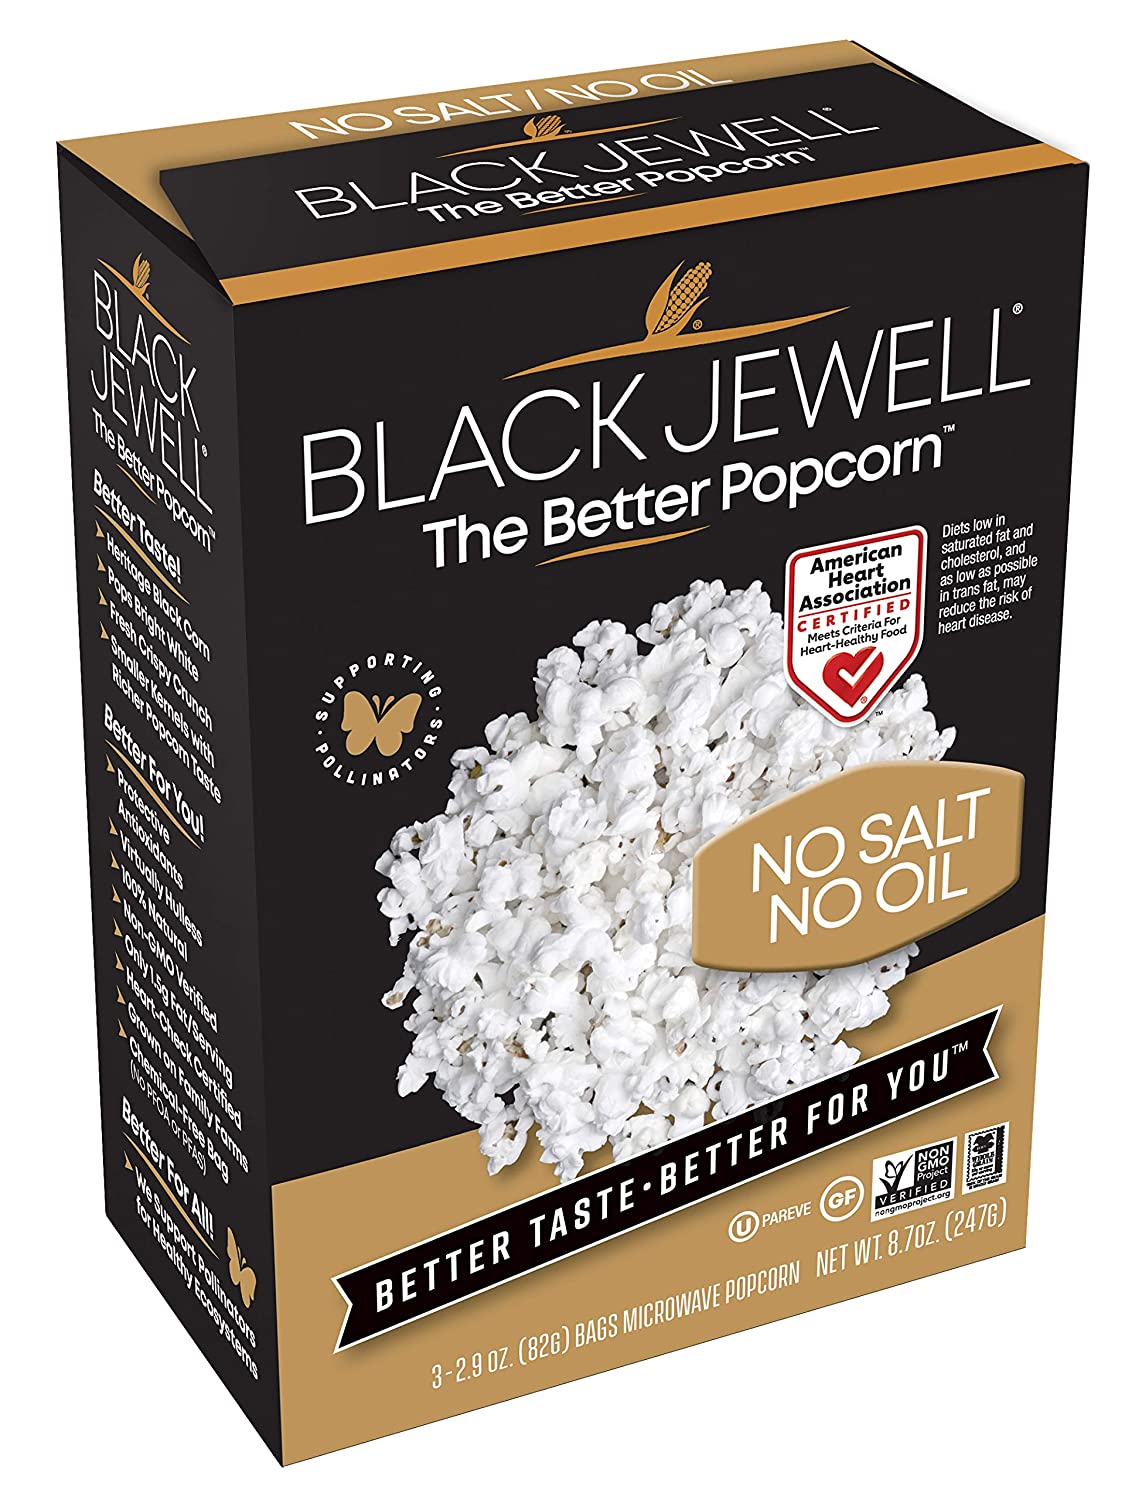 Black Jewell Gourmet Microwave Popcorn, Healthy Popcorn Snack, No Salt No Oil, 8.7 Ounces (Pack of 1)